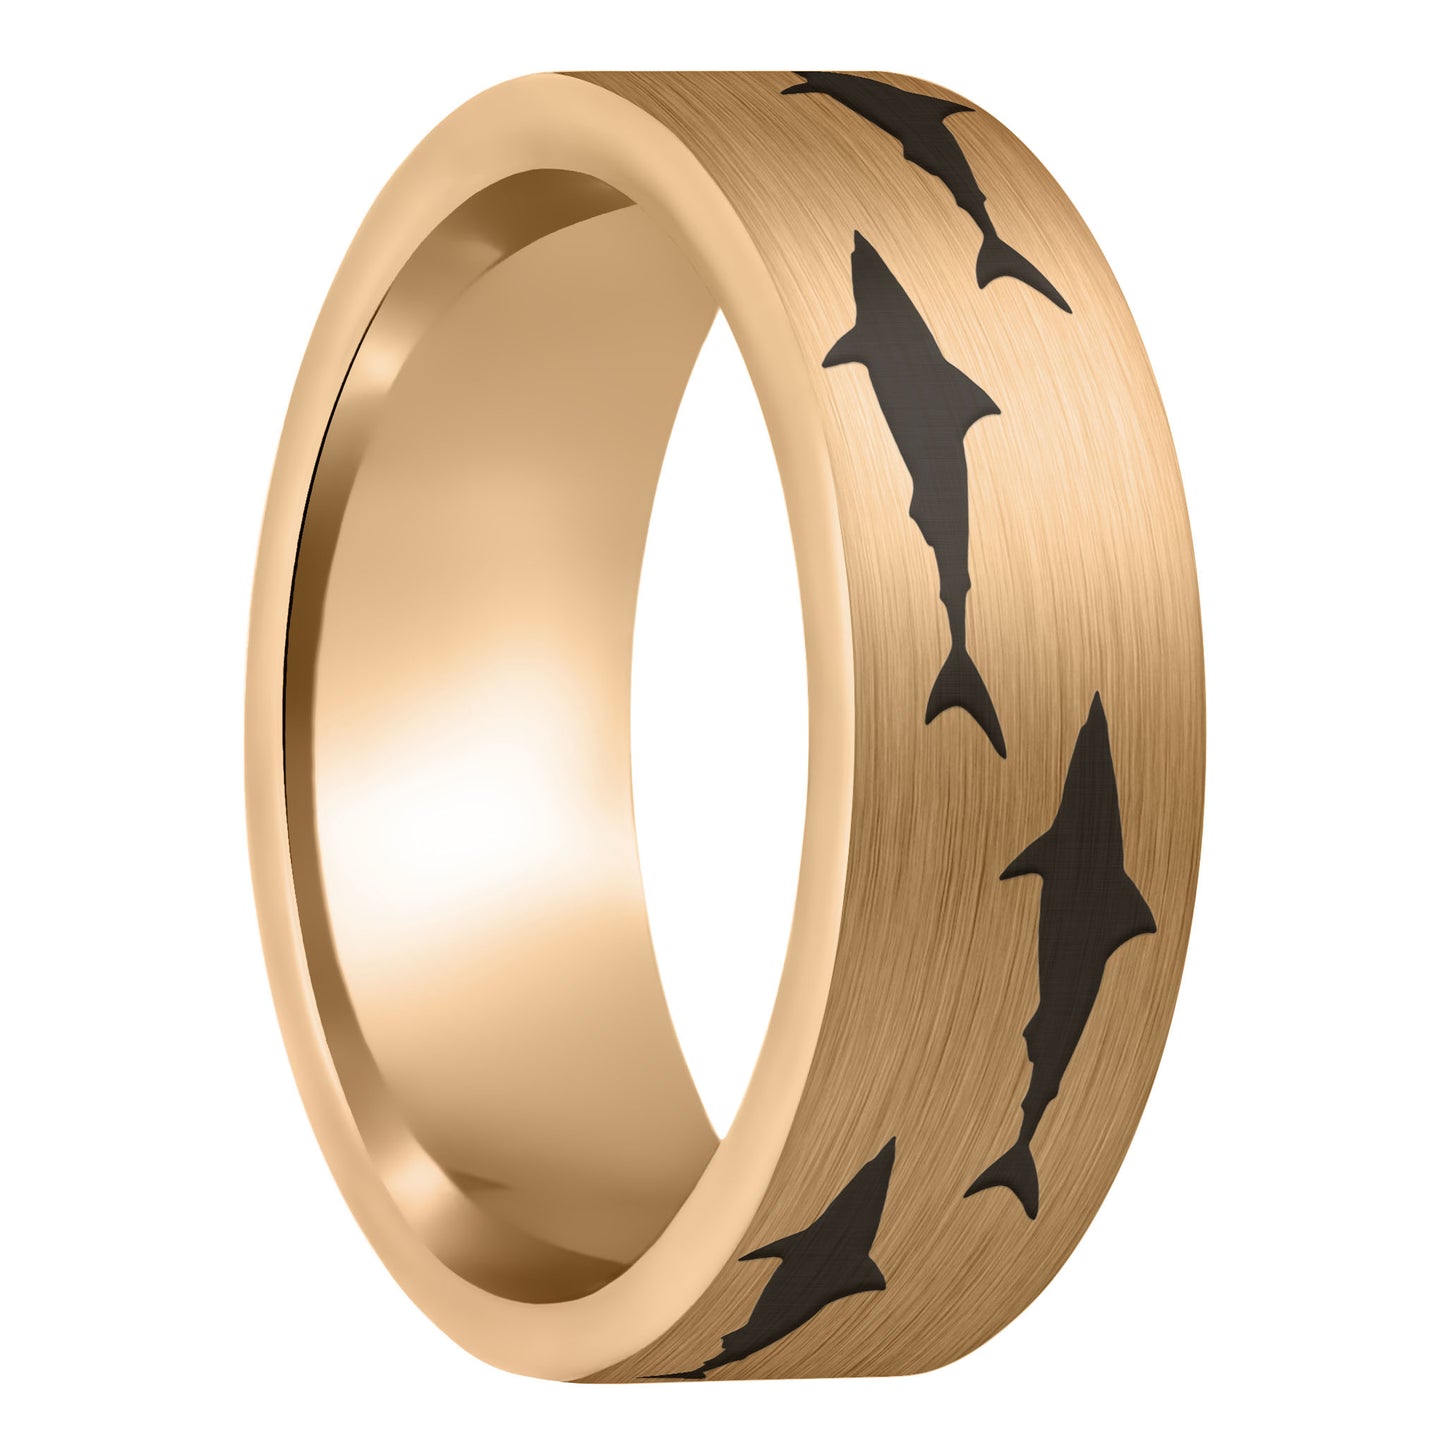 A shark brushed rose gold tungsten men's wedding band displayed on a plain white background.